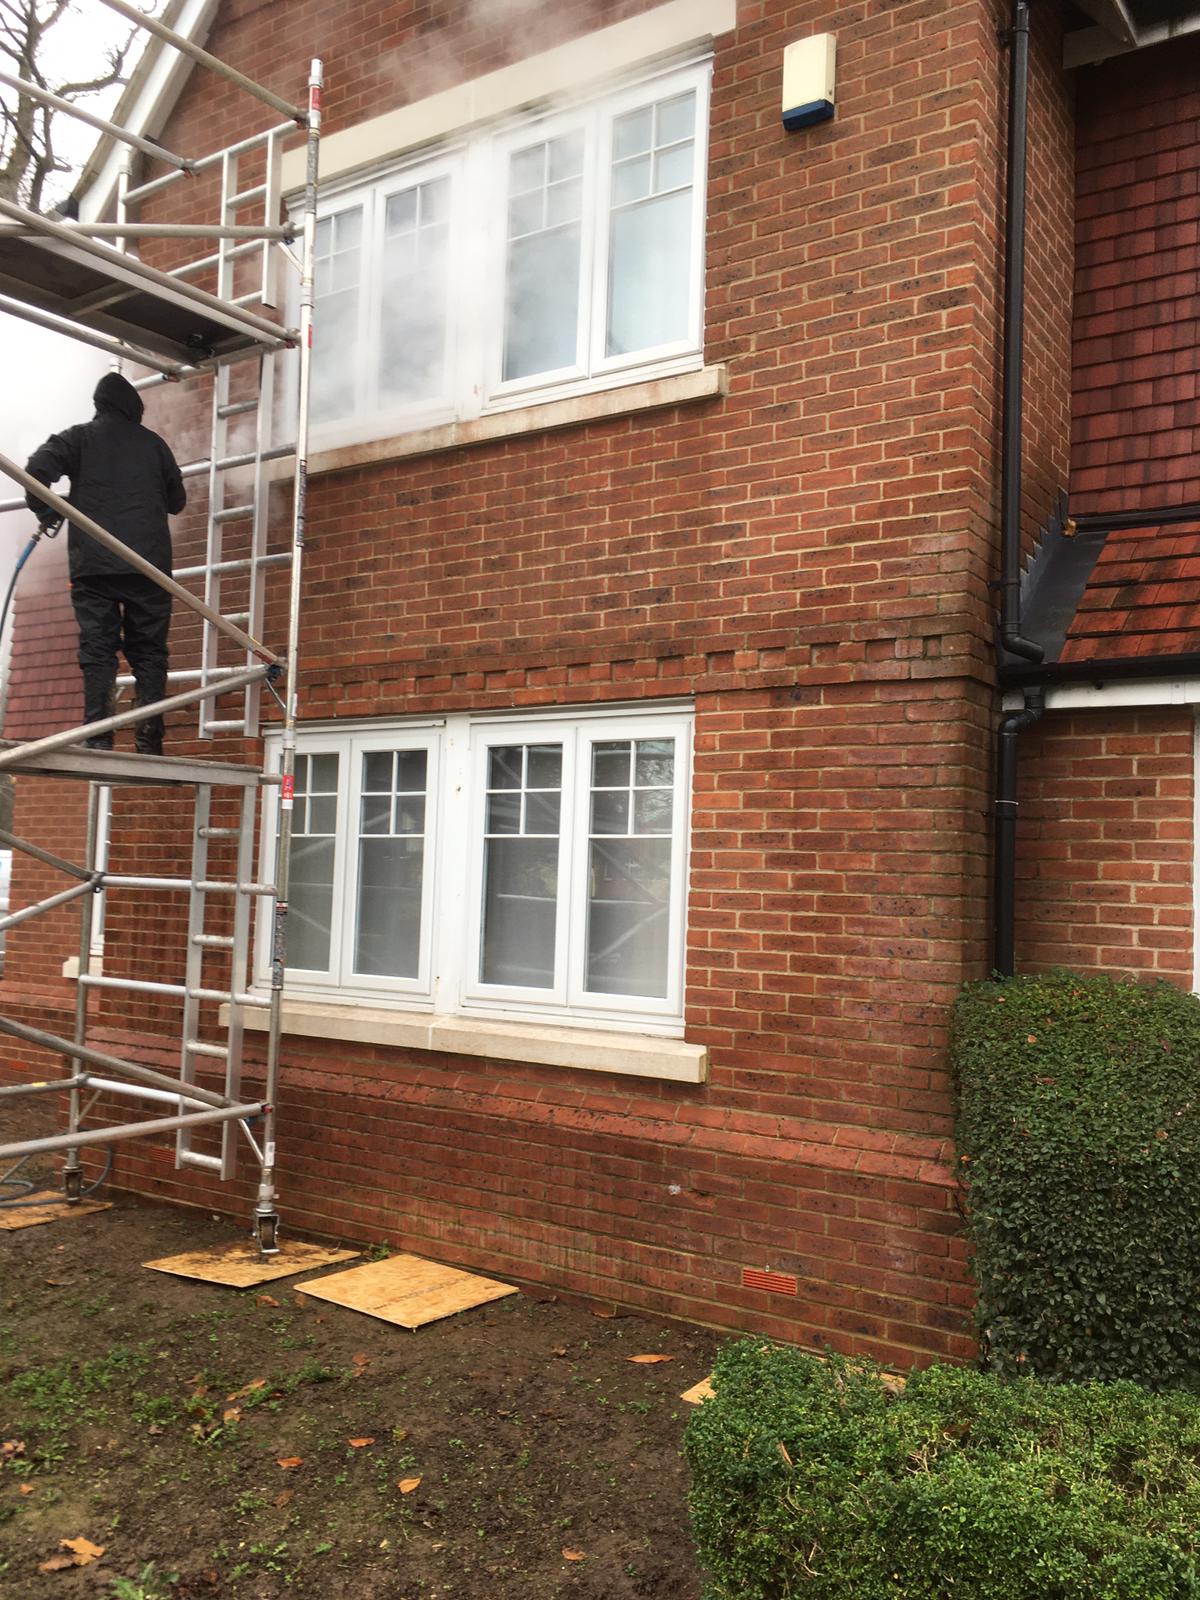 Cleaning the external bricks of a house